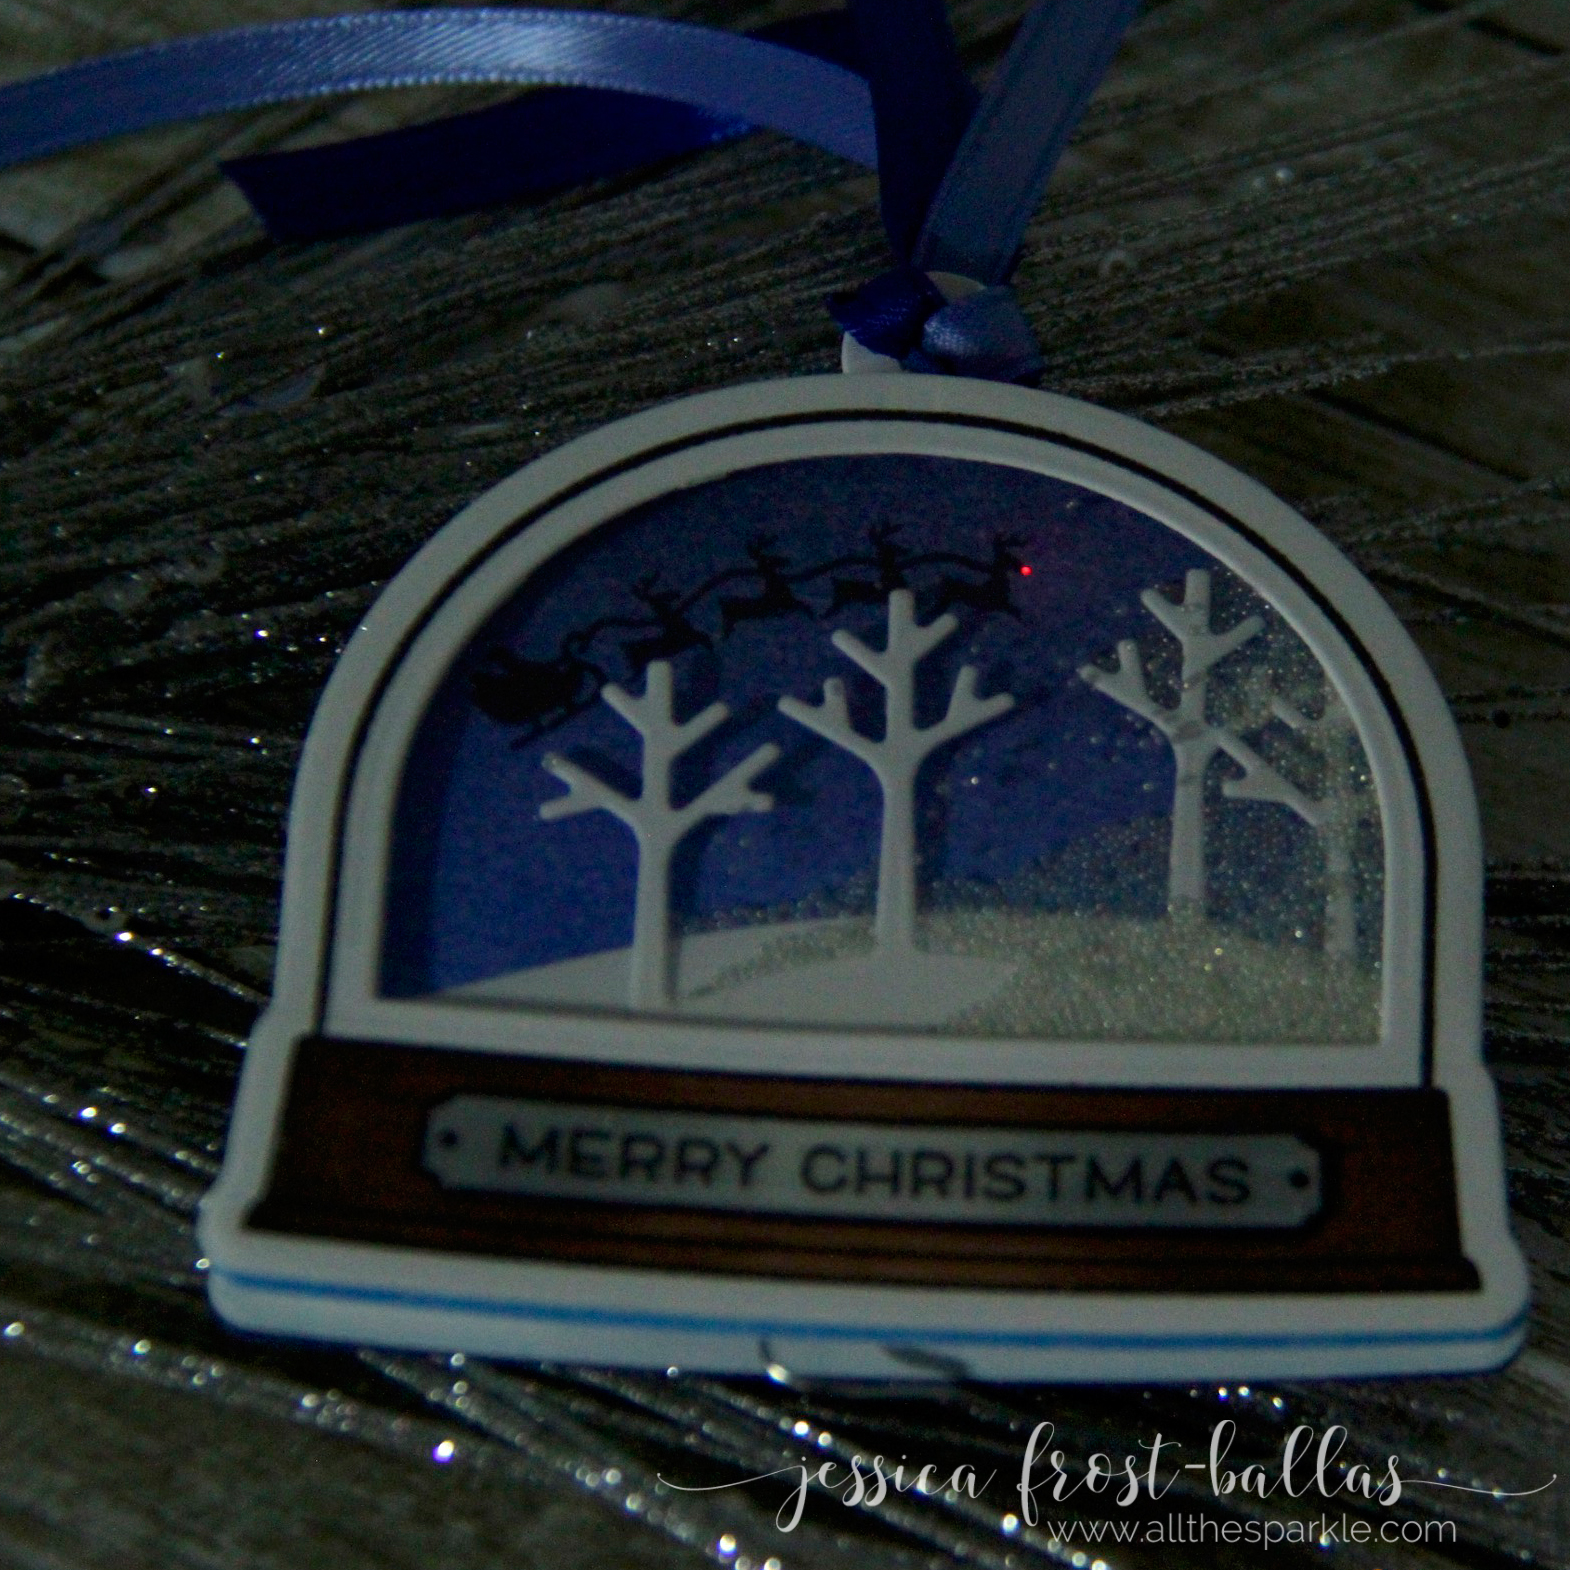 Light-up ornament card featuring Lawn Fawn stamp and Chibitronics LED Circuit Stickers